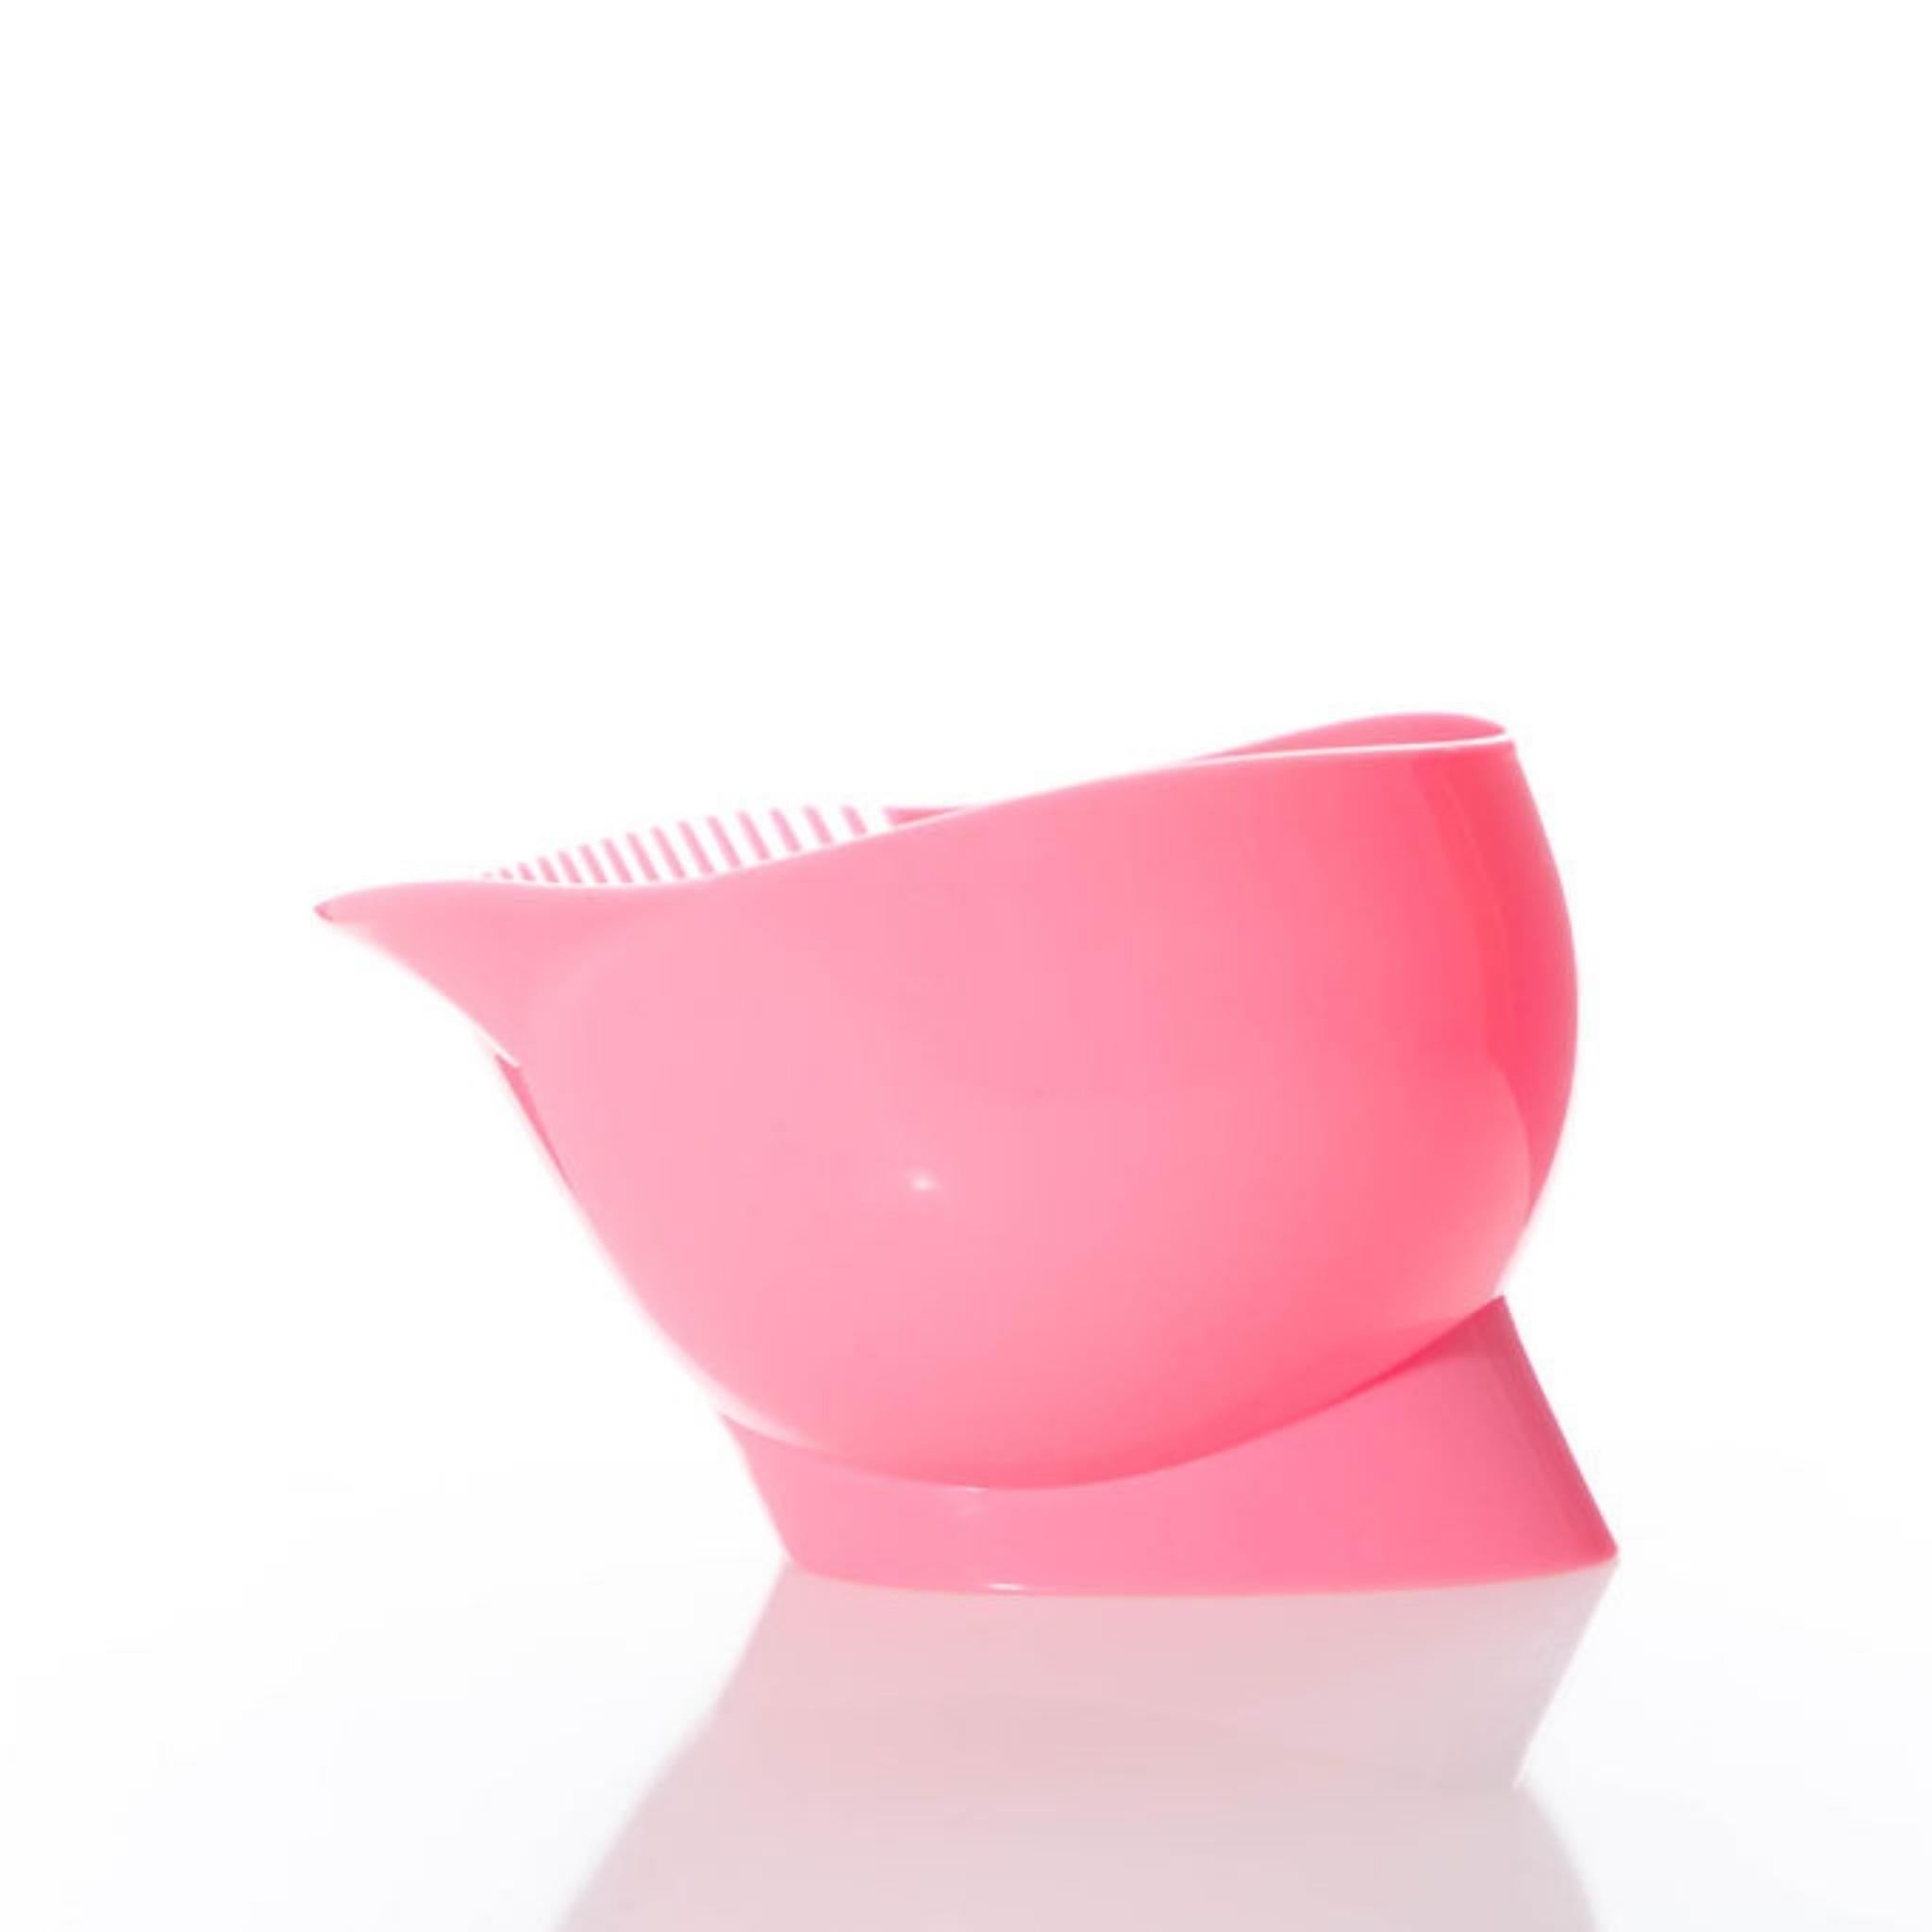 TINT BOWL MADE FROM RECYCLED PLASTICS